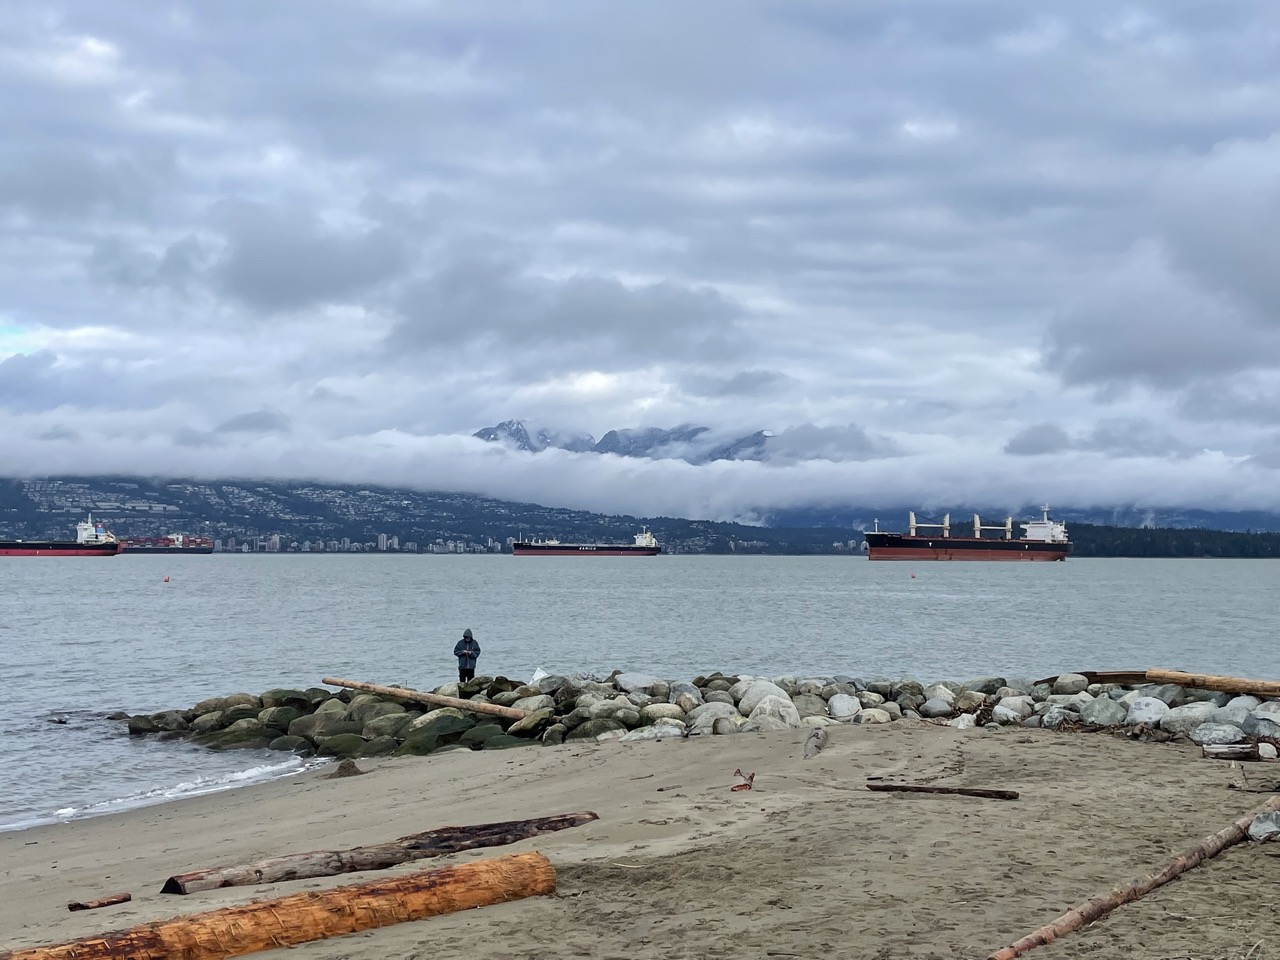 I visited the cold beach and saw many container ships queued up.